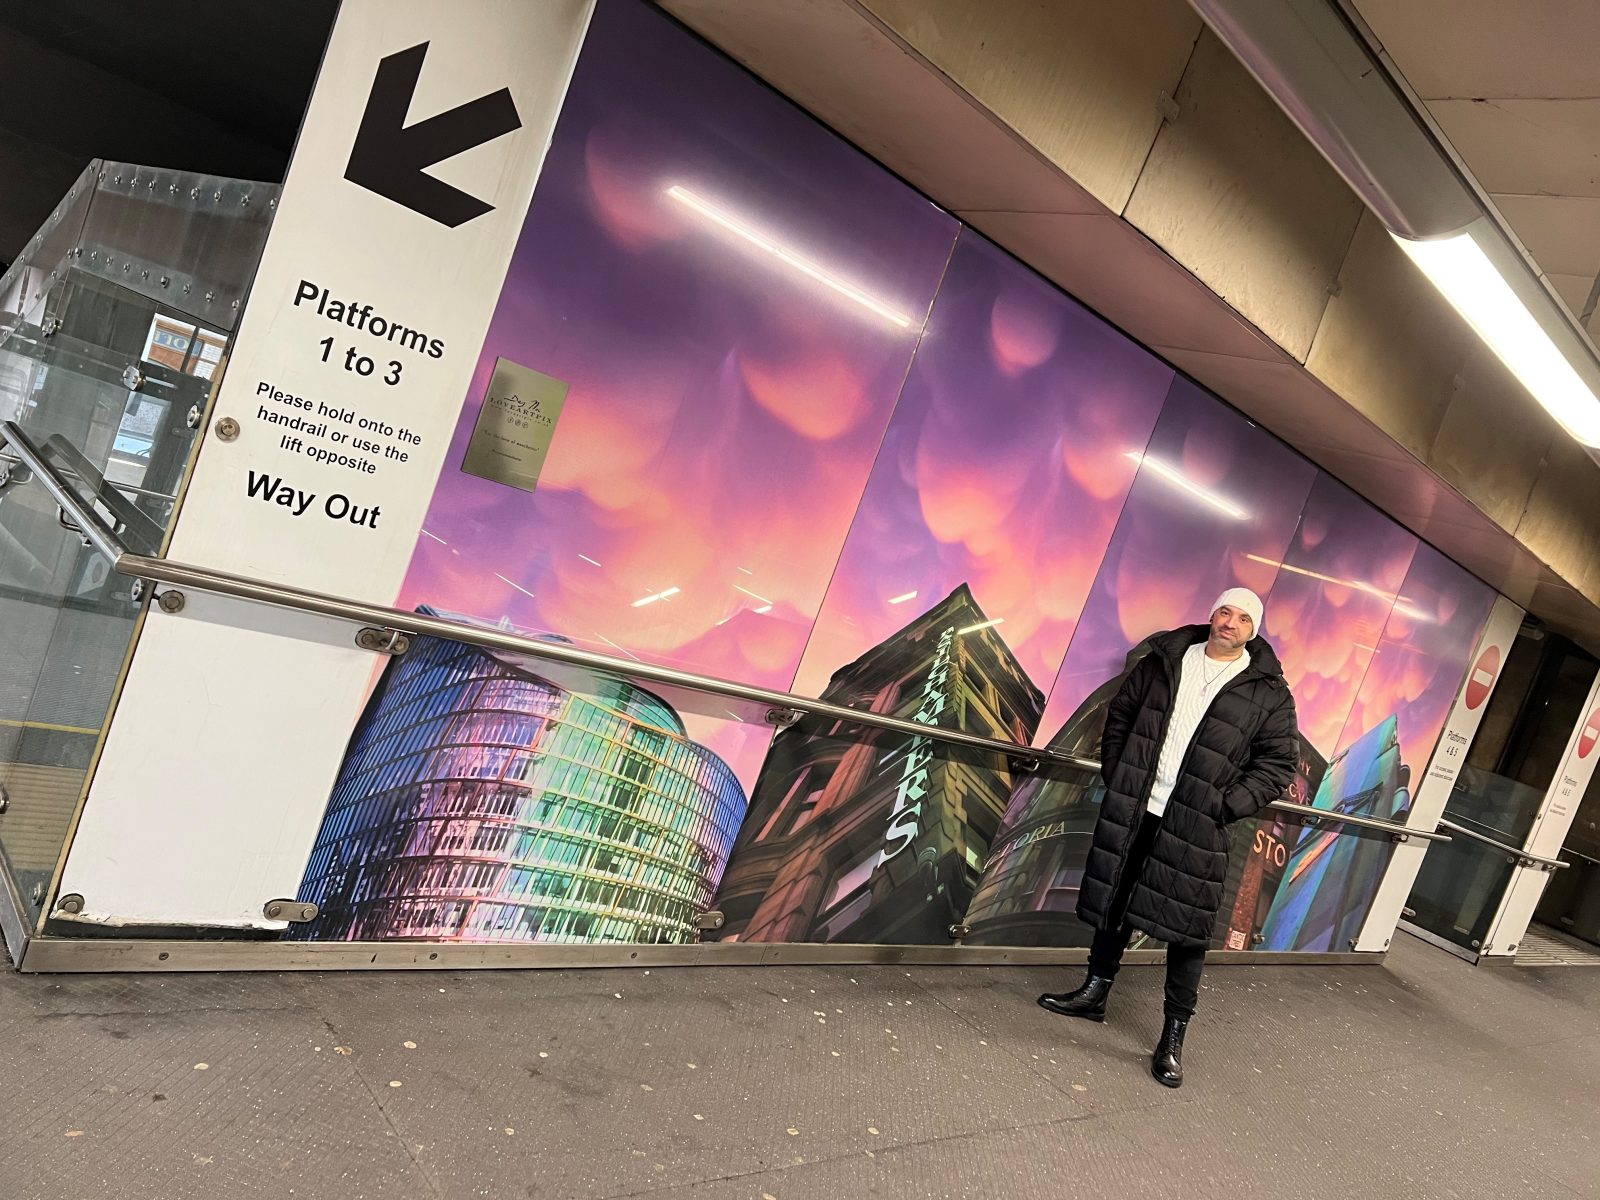 Dull commuter thoroughfare given colourful makeover by local artist with autism, The Manc